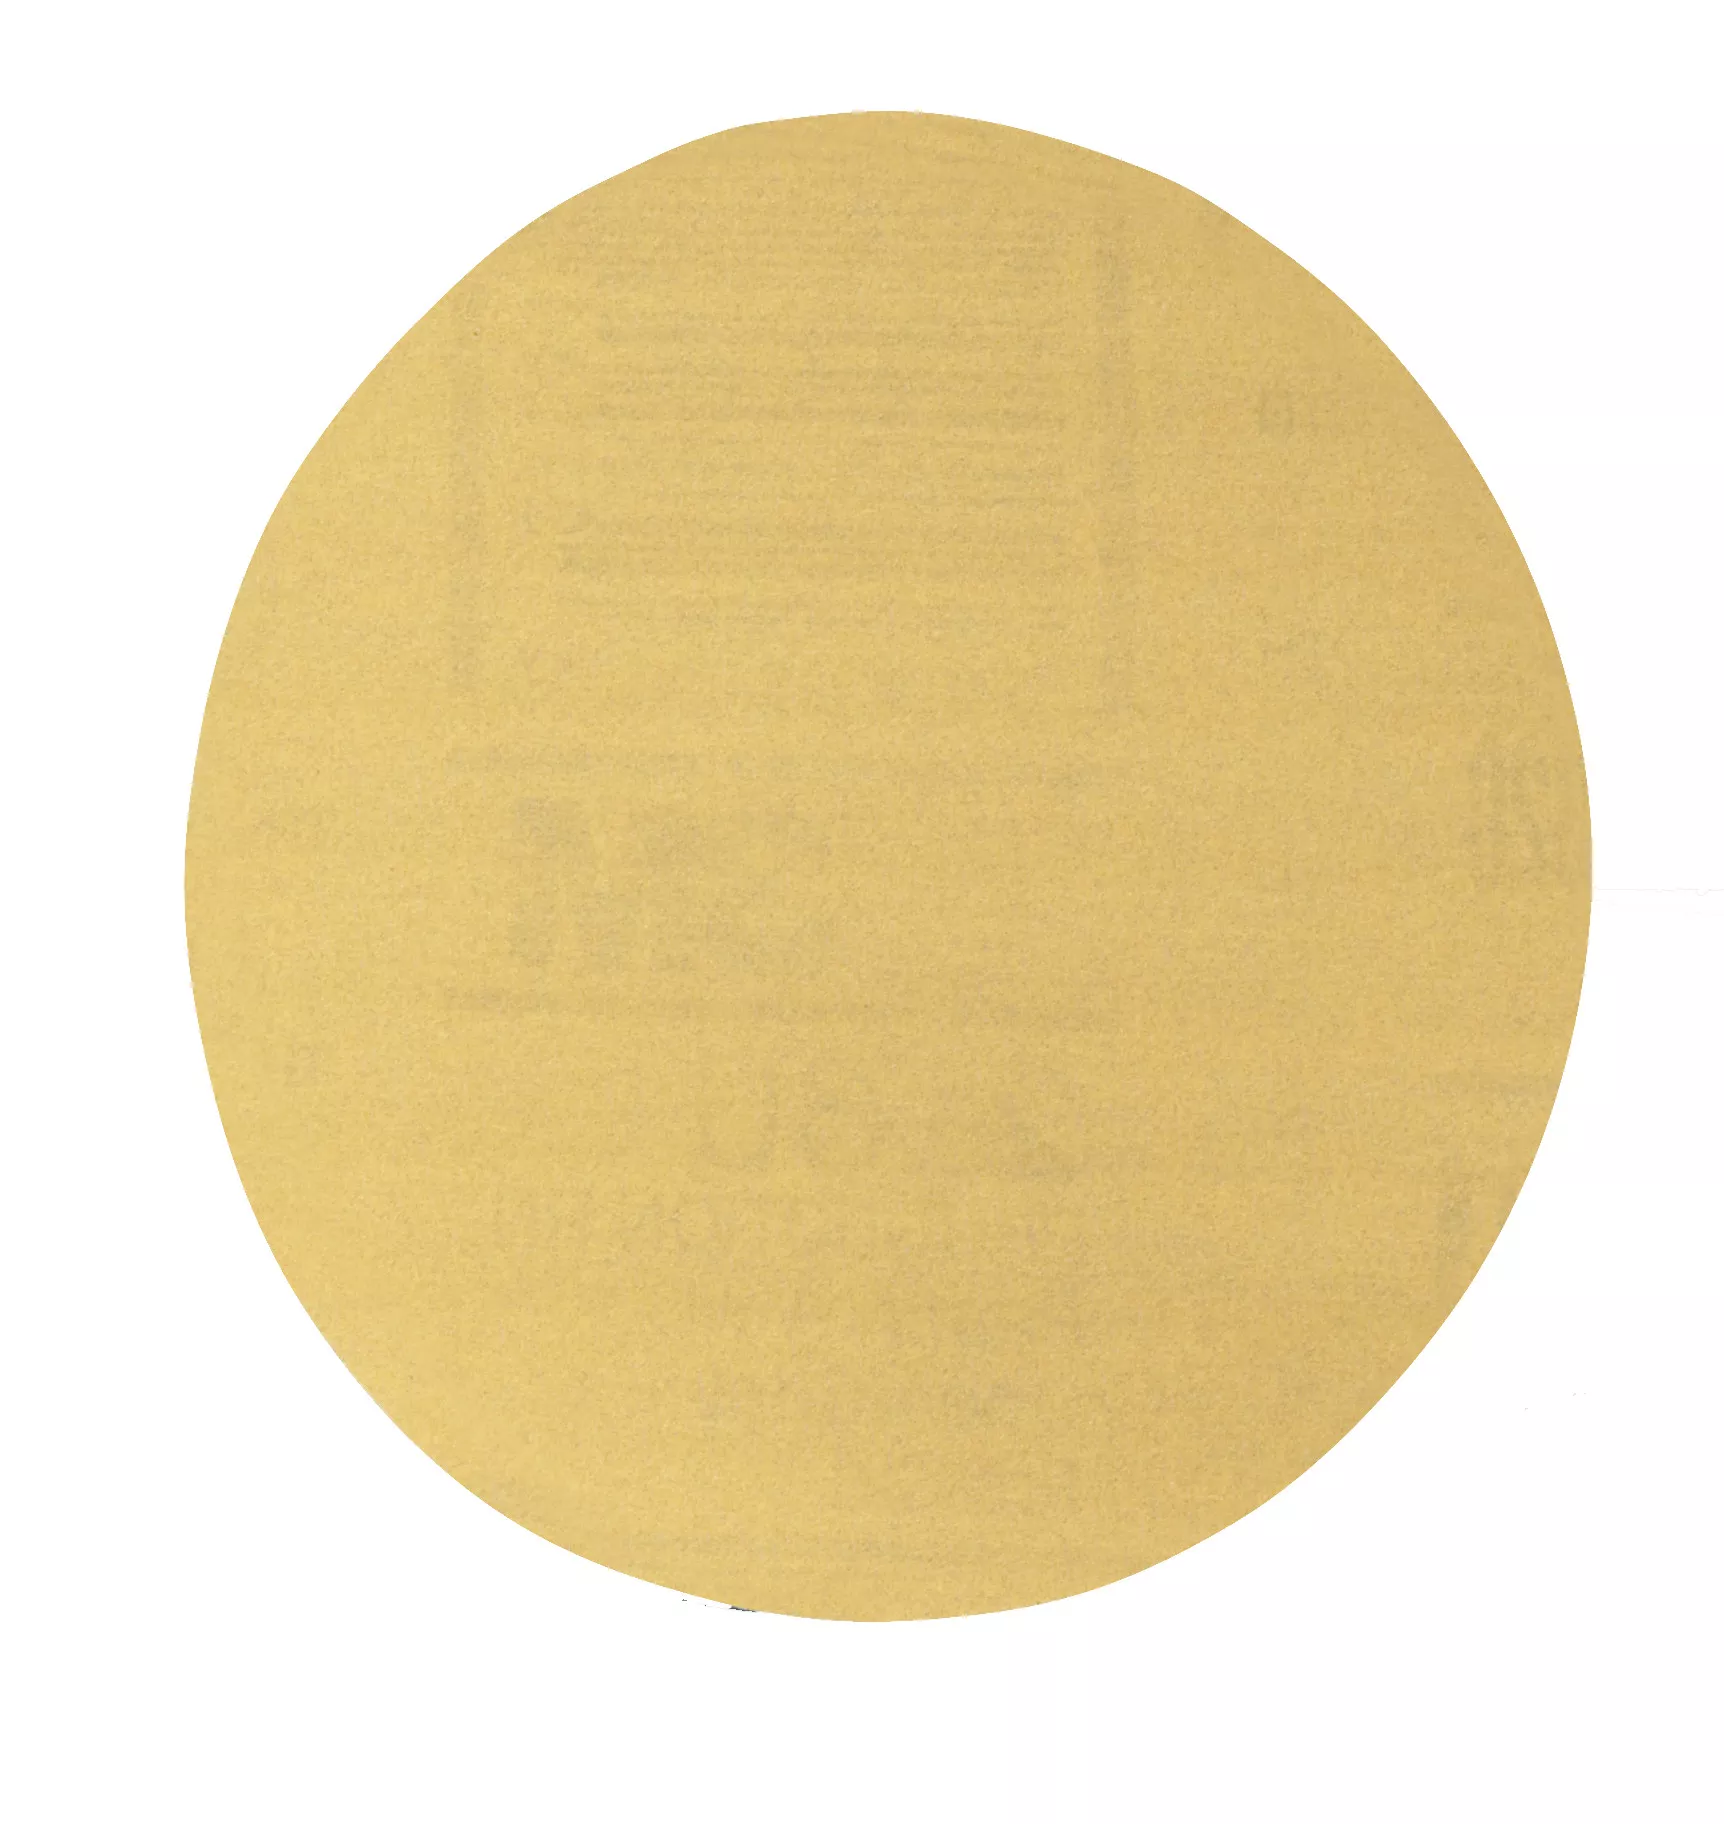 Product Number 225L | 3M™ Stikit™ Gold Film Disc Roll